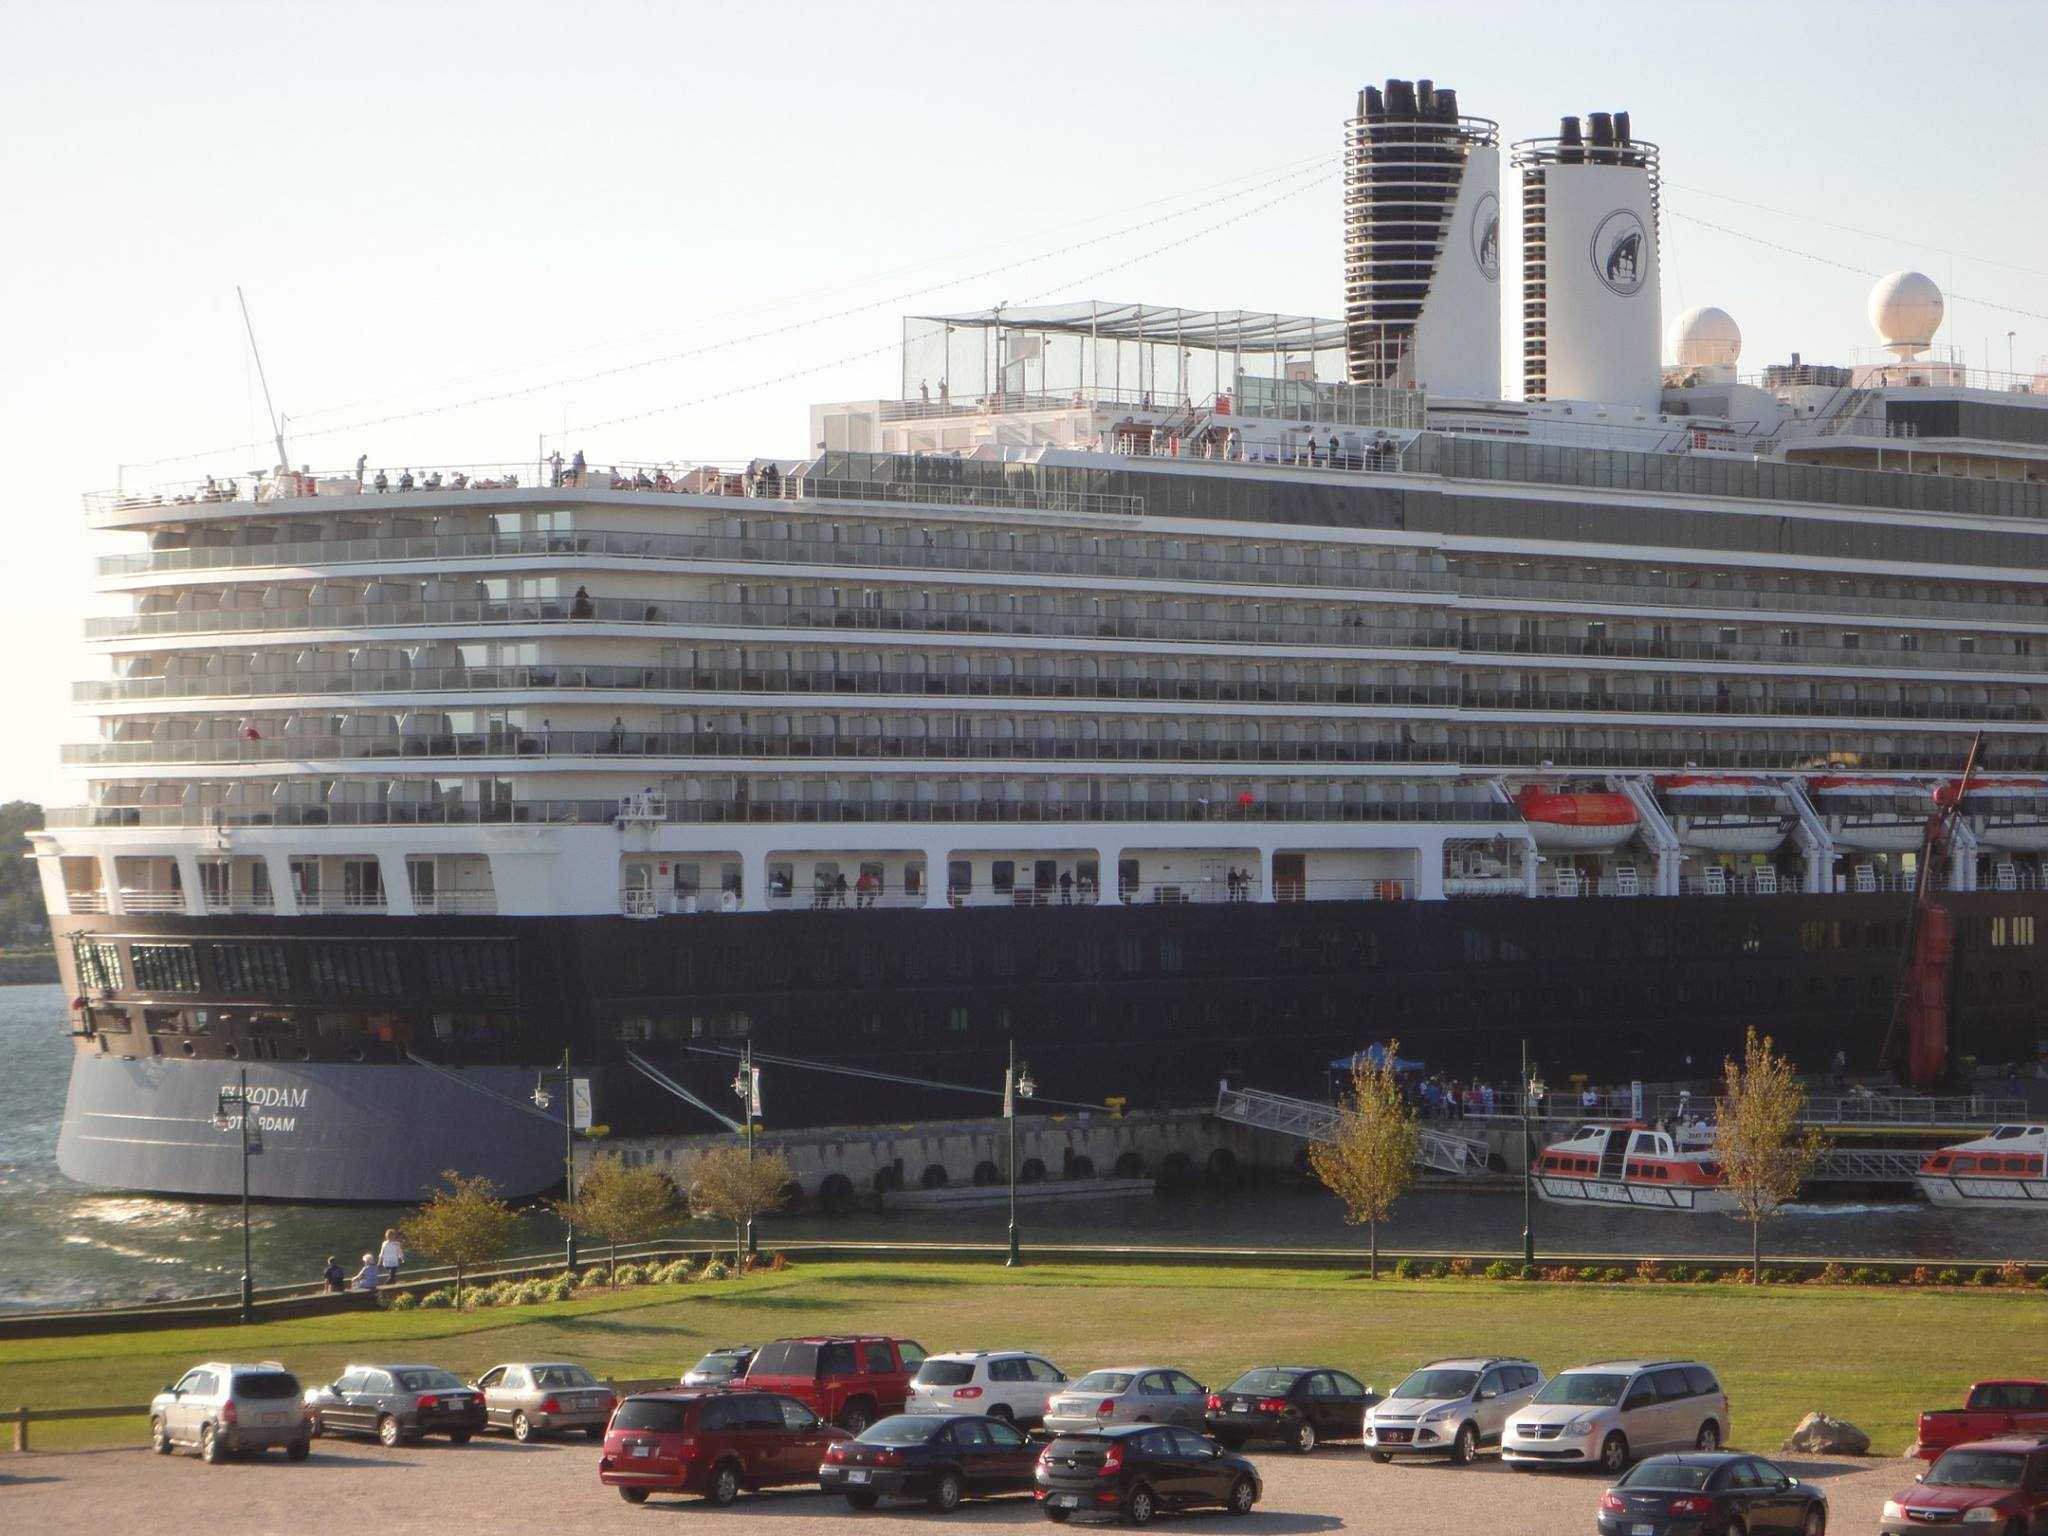 Here is the Rear End of the Cruise Ship.